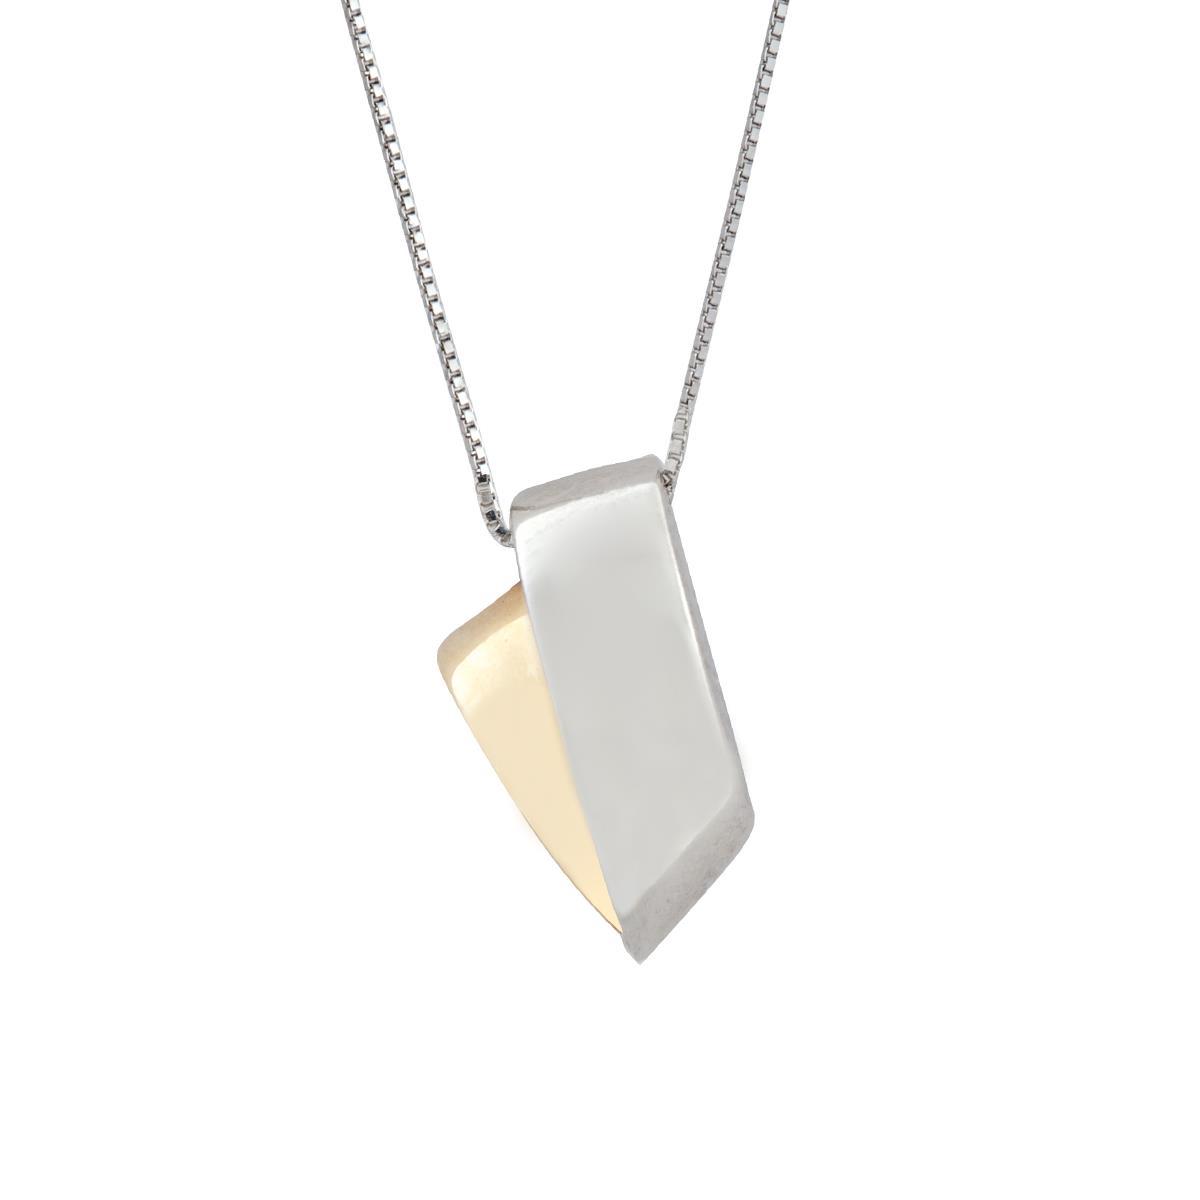 Shiny two-tone necklace in 18kt gold - CEA2549-LN